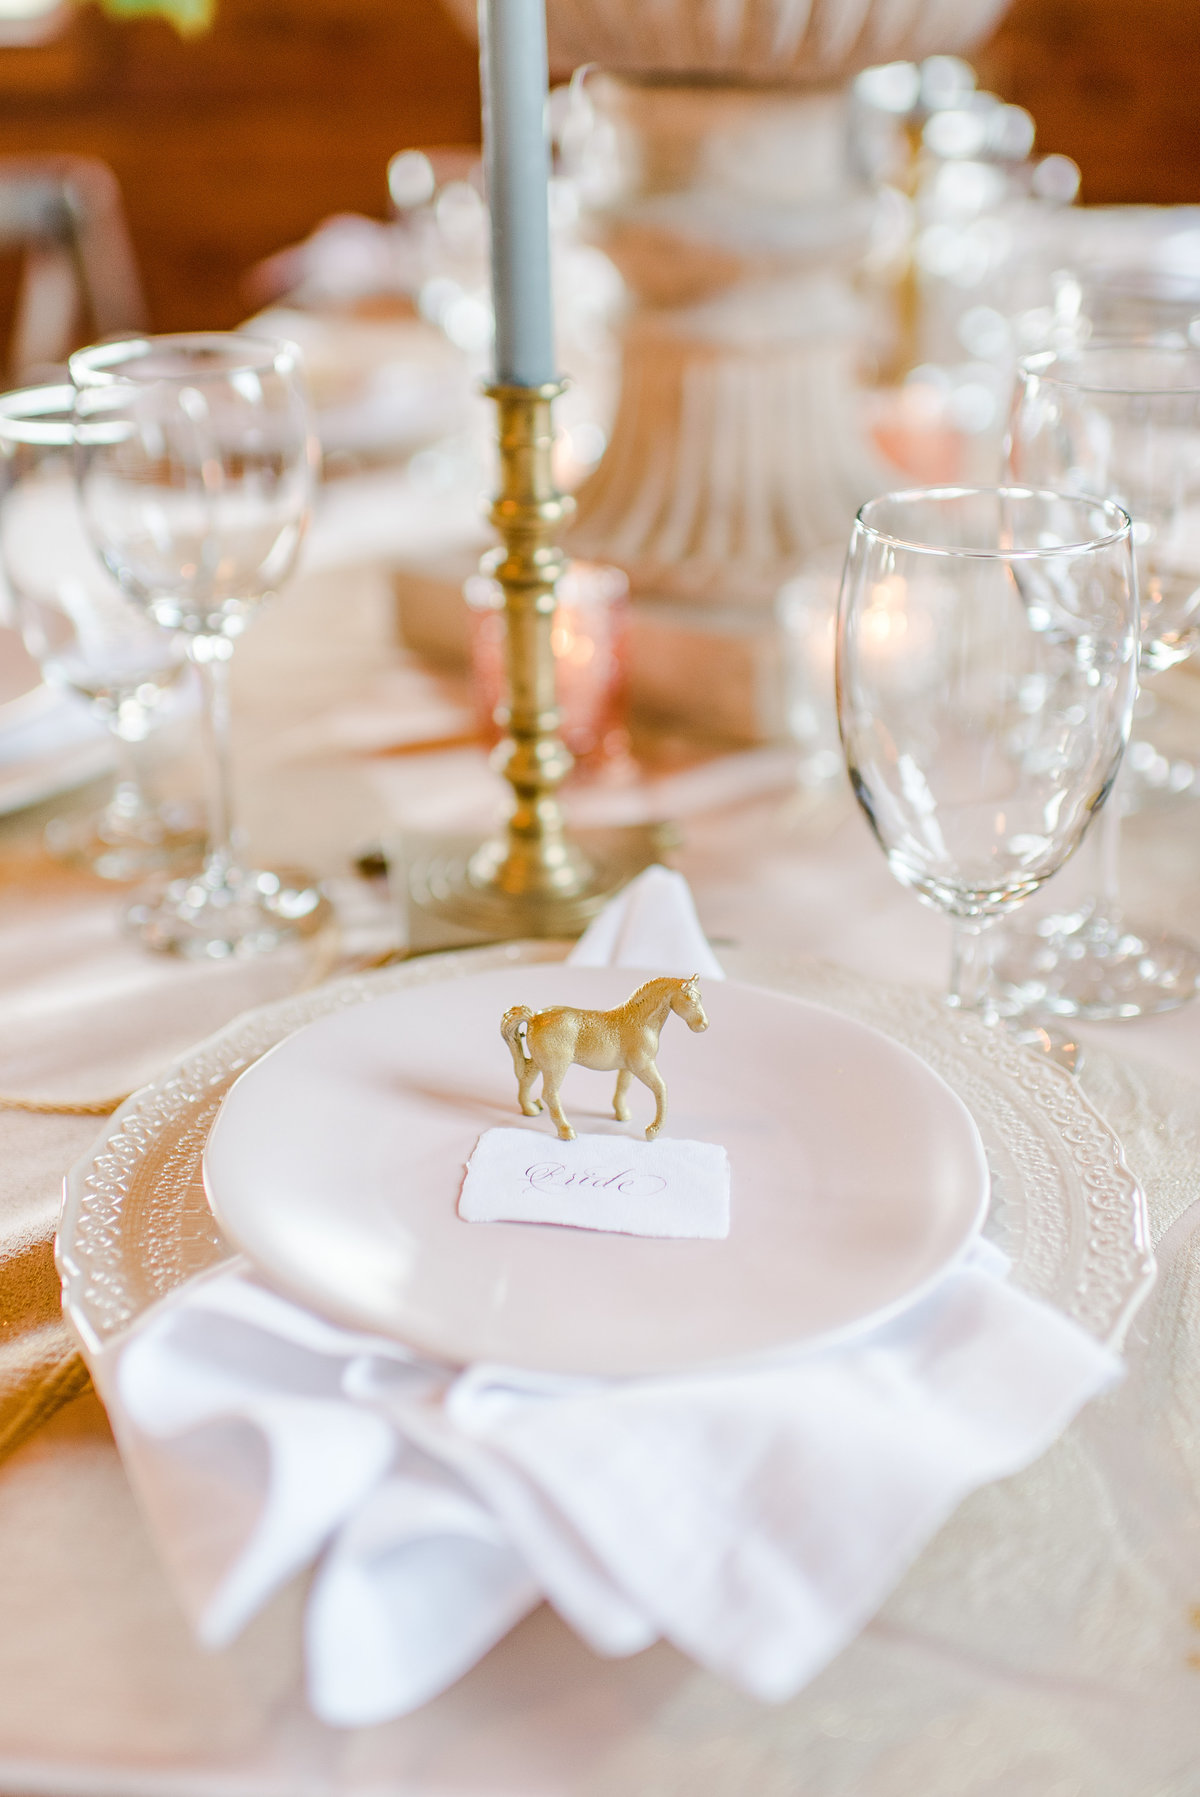 Place Setting for wedding at Stable View Equestrian in Aiken SC